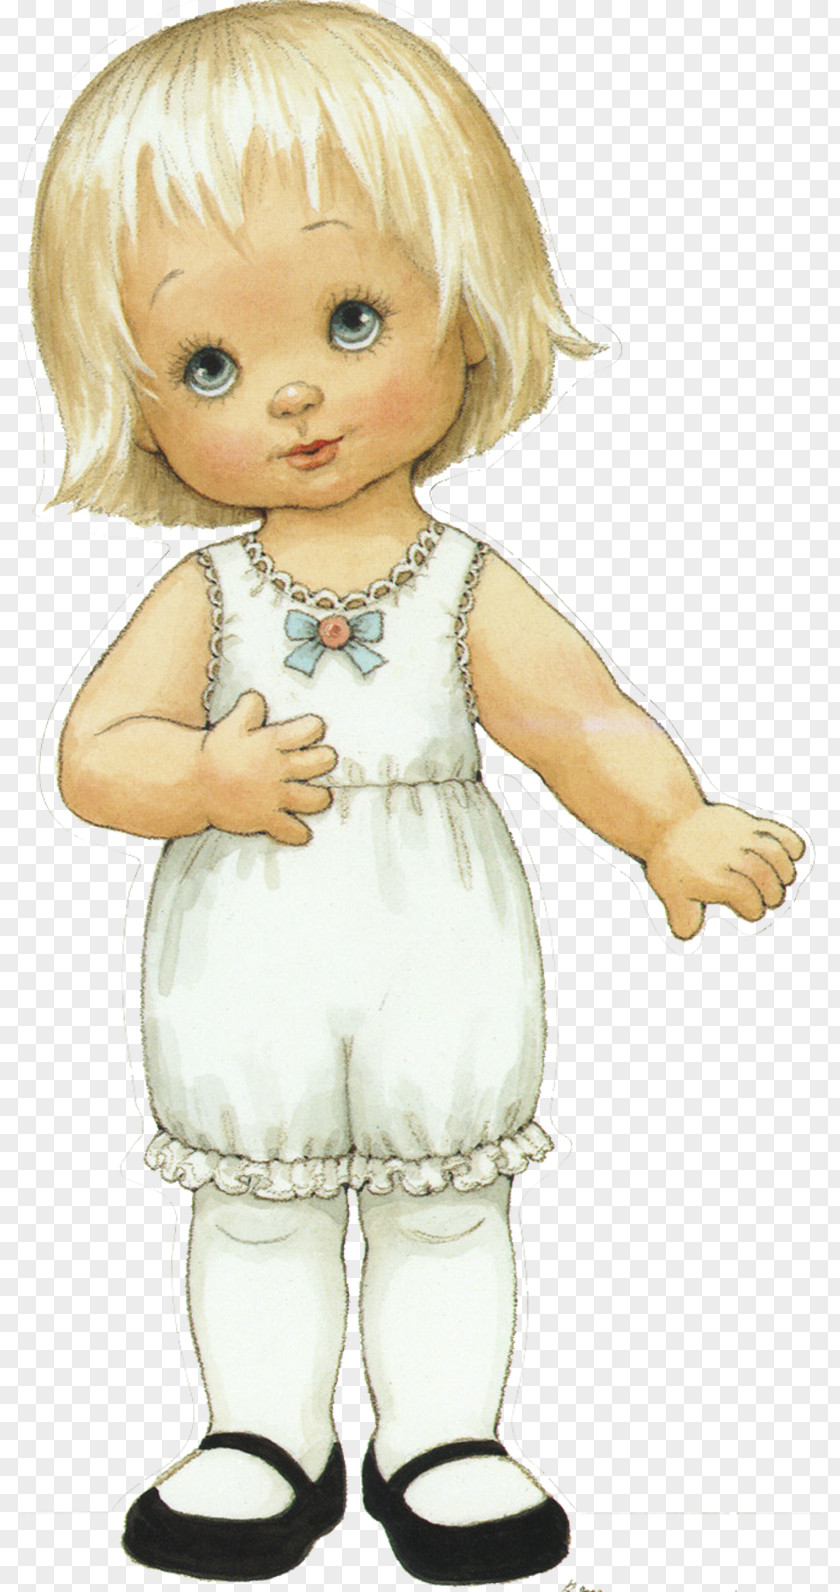 Friends Paper Doll Toy Child PNG